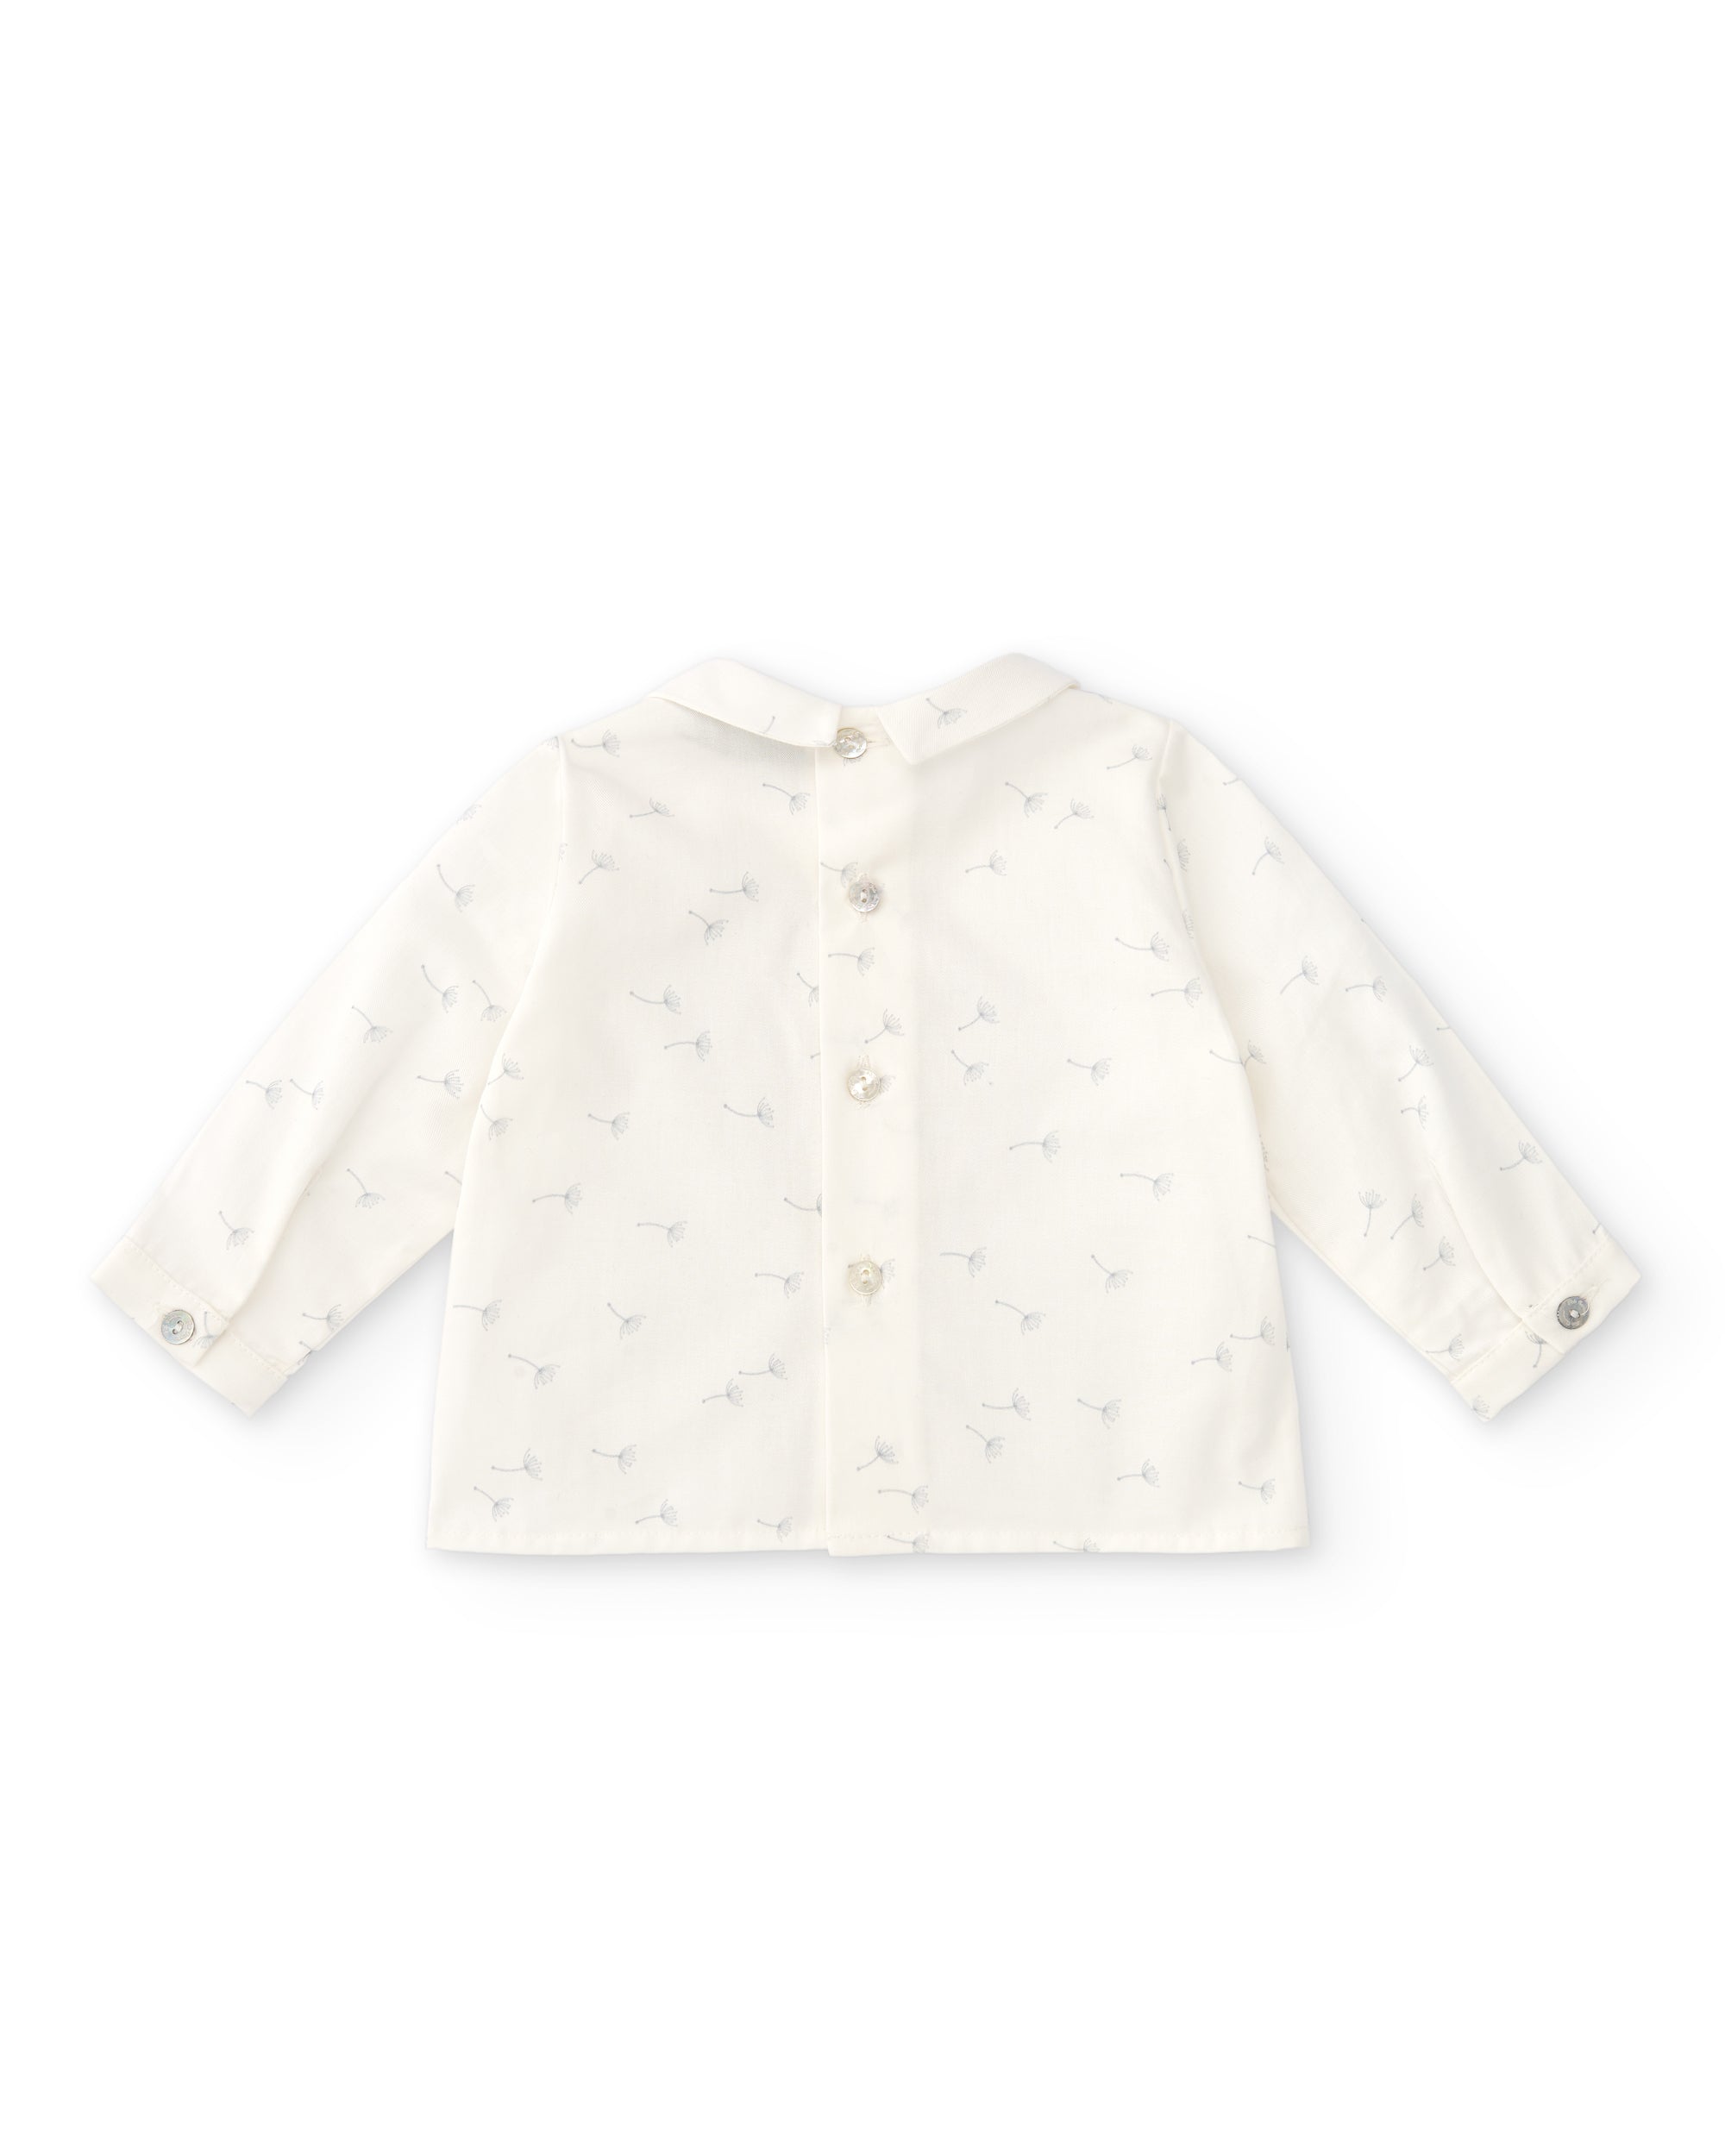 Back Button White Cotton Shirt with light blue leaves